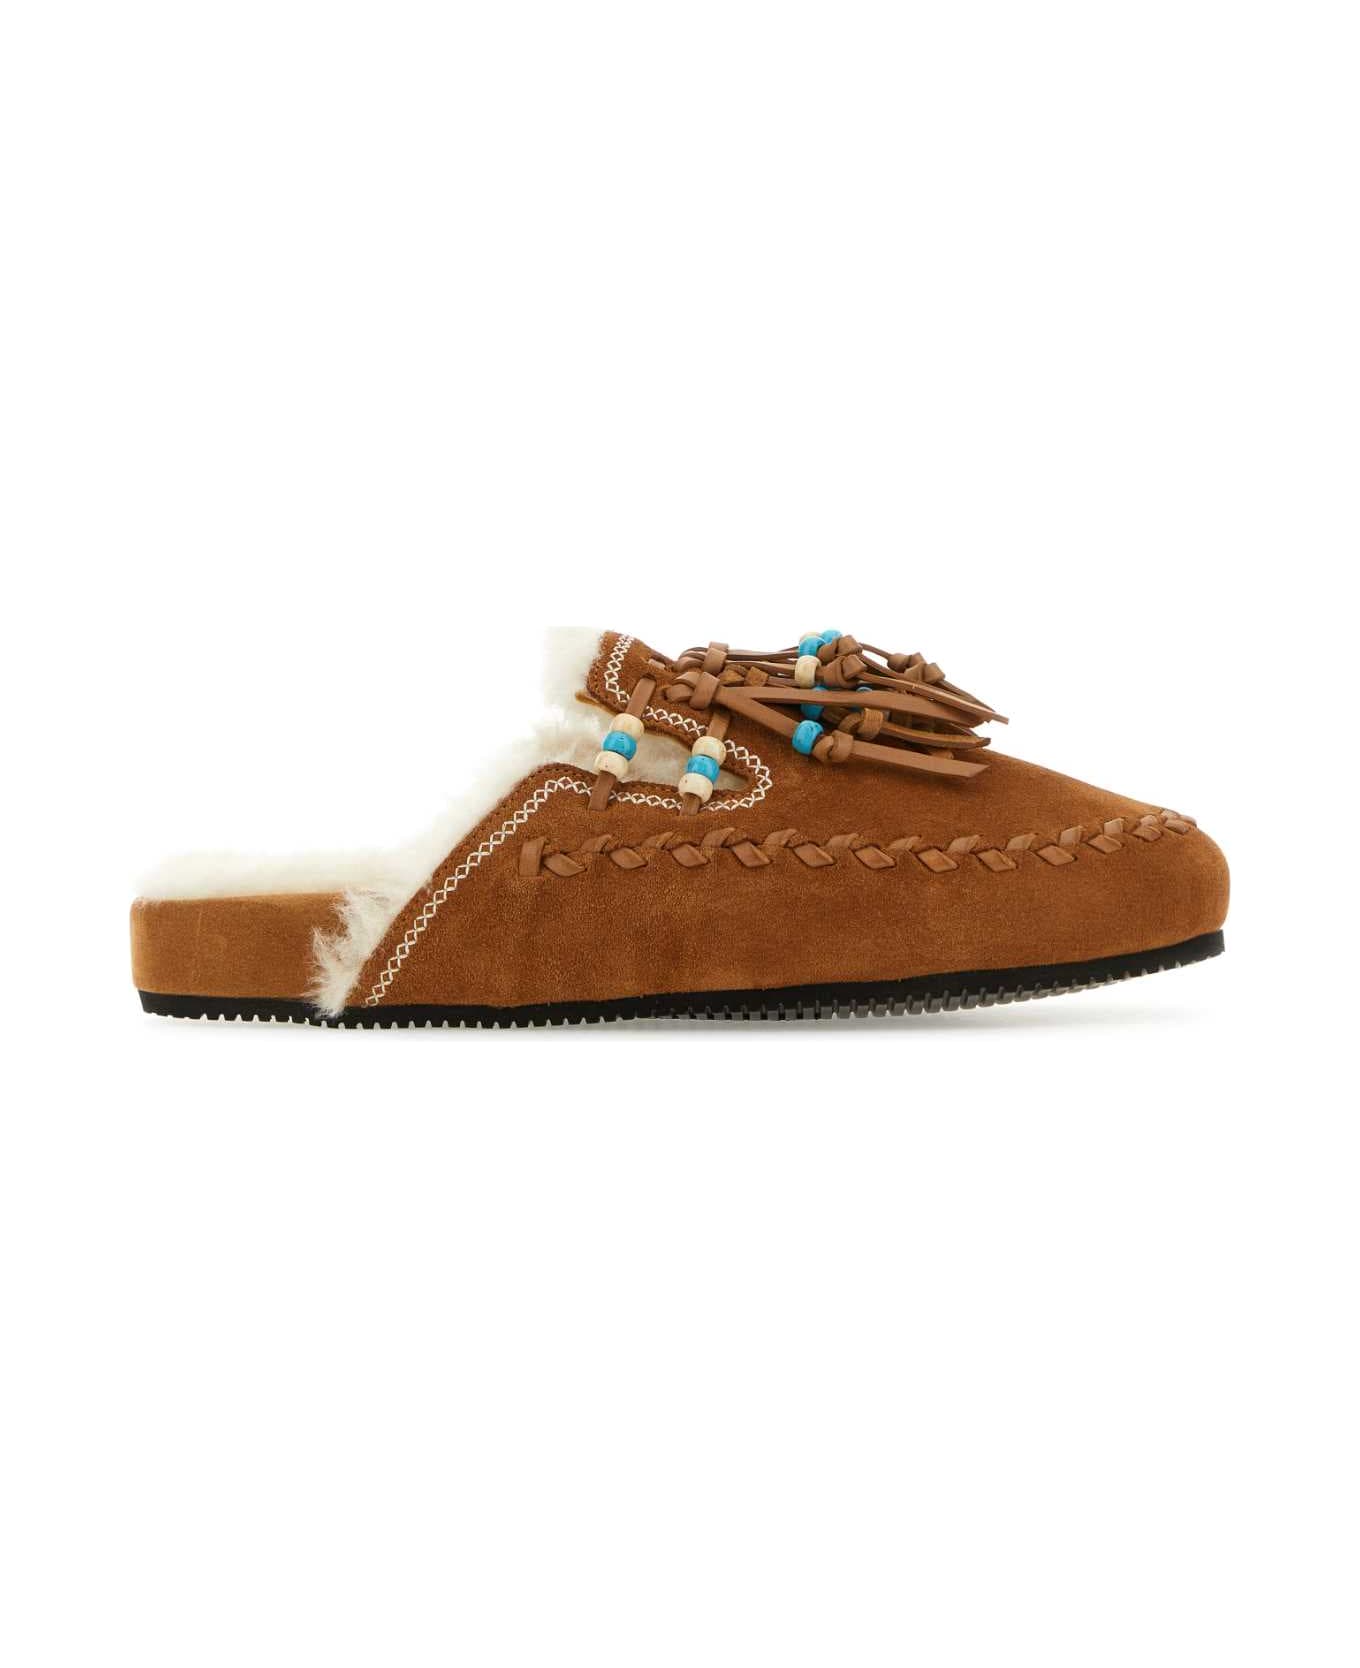 Alanui Brown Suede Leather The Journey Slippers - 6400